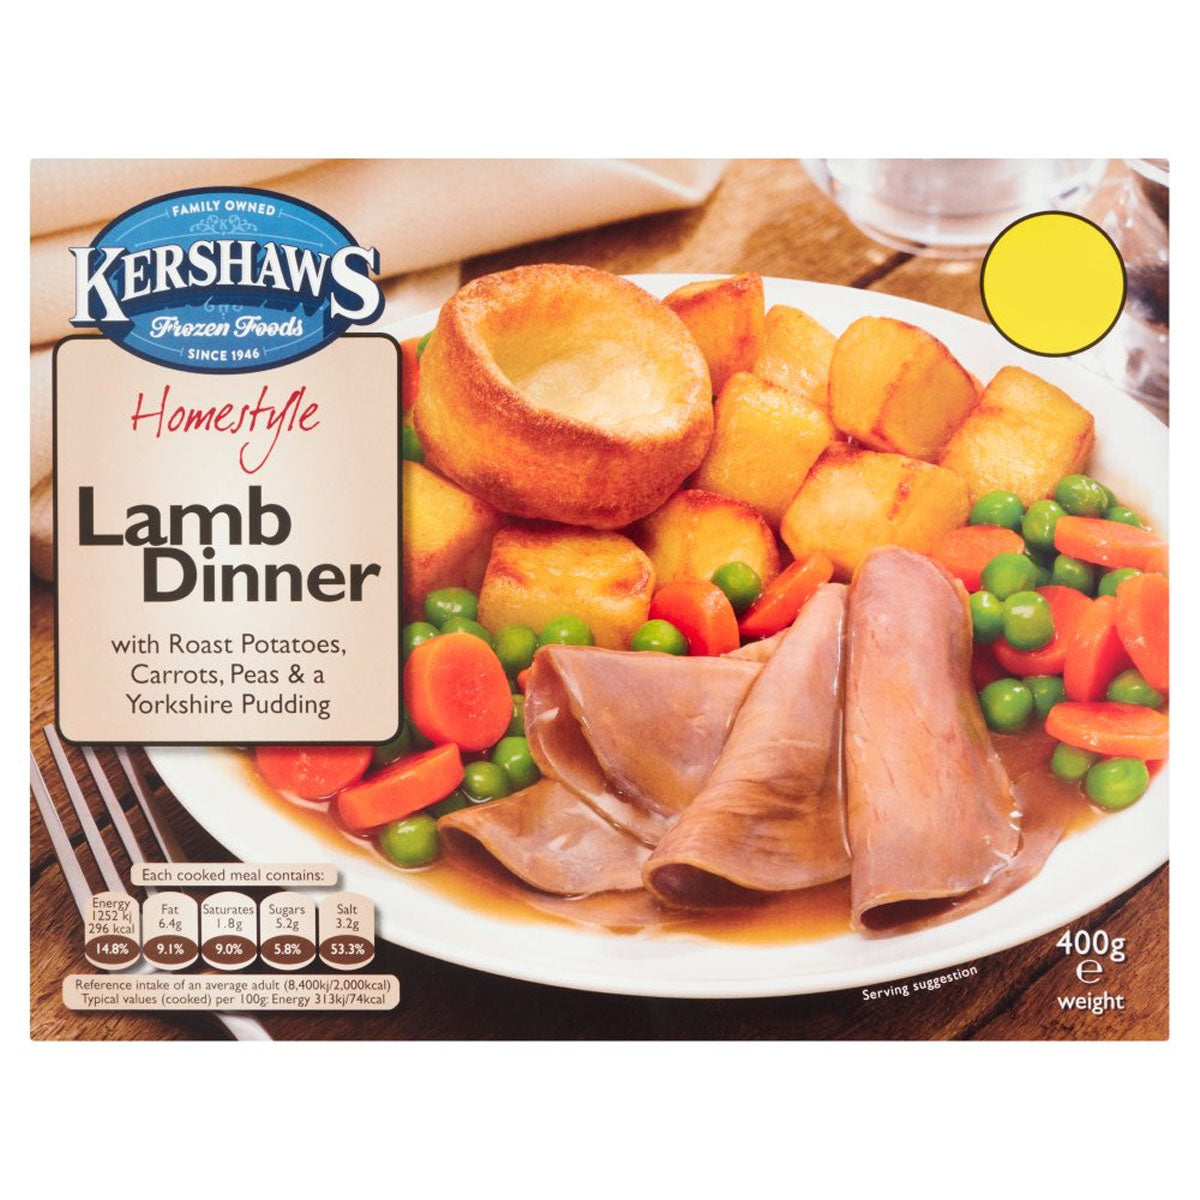 Kershaws - Homestyle Lamb Dinner with Roast Potatoes, Carrots, Peas & a Yorkshire Pudding - 400g lamb dinner with peas and carrots.